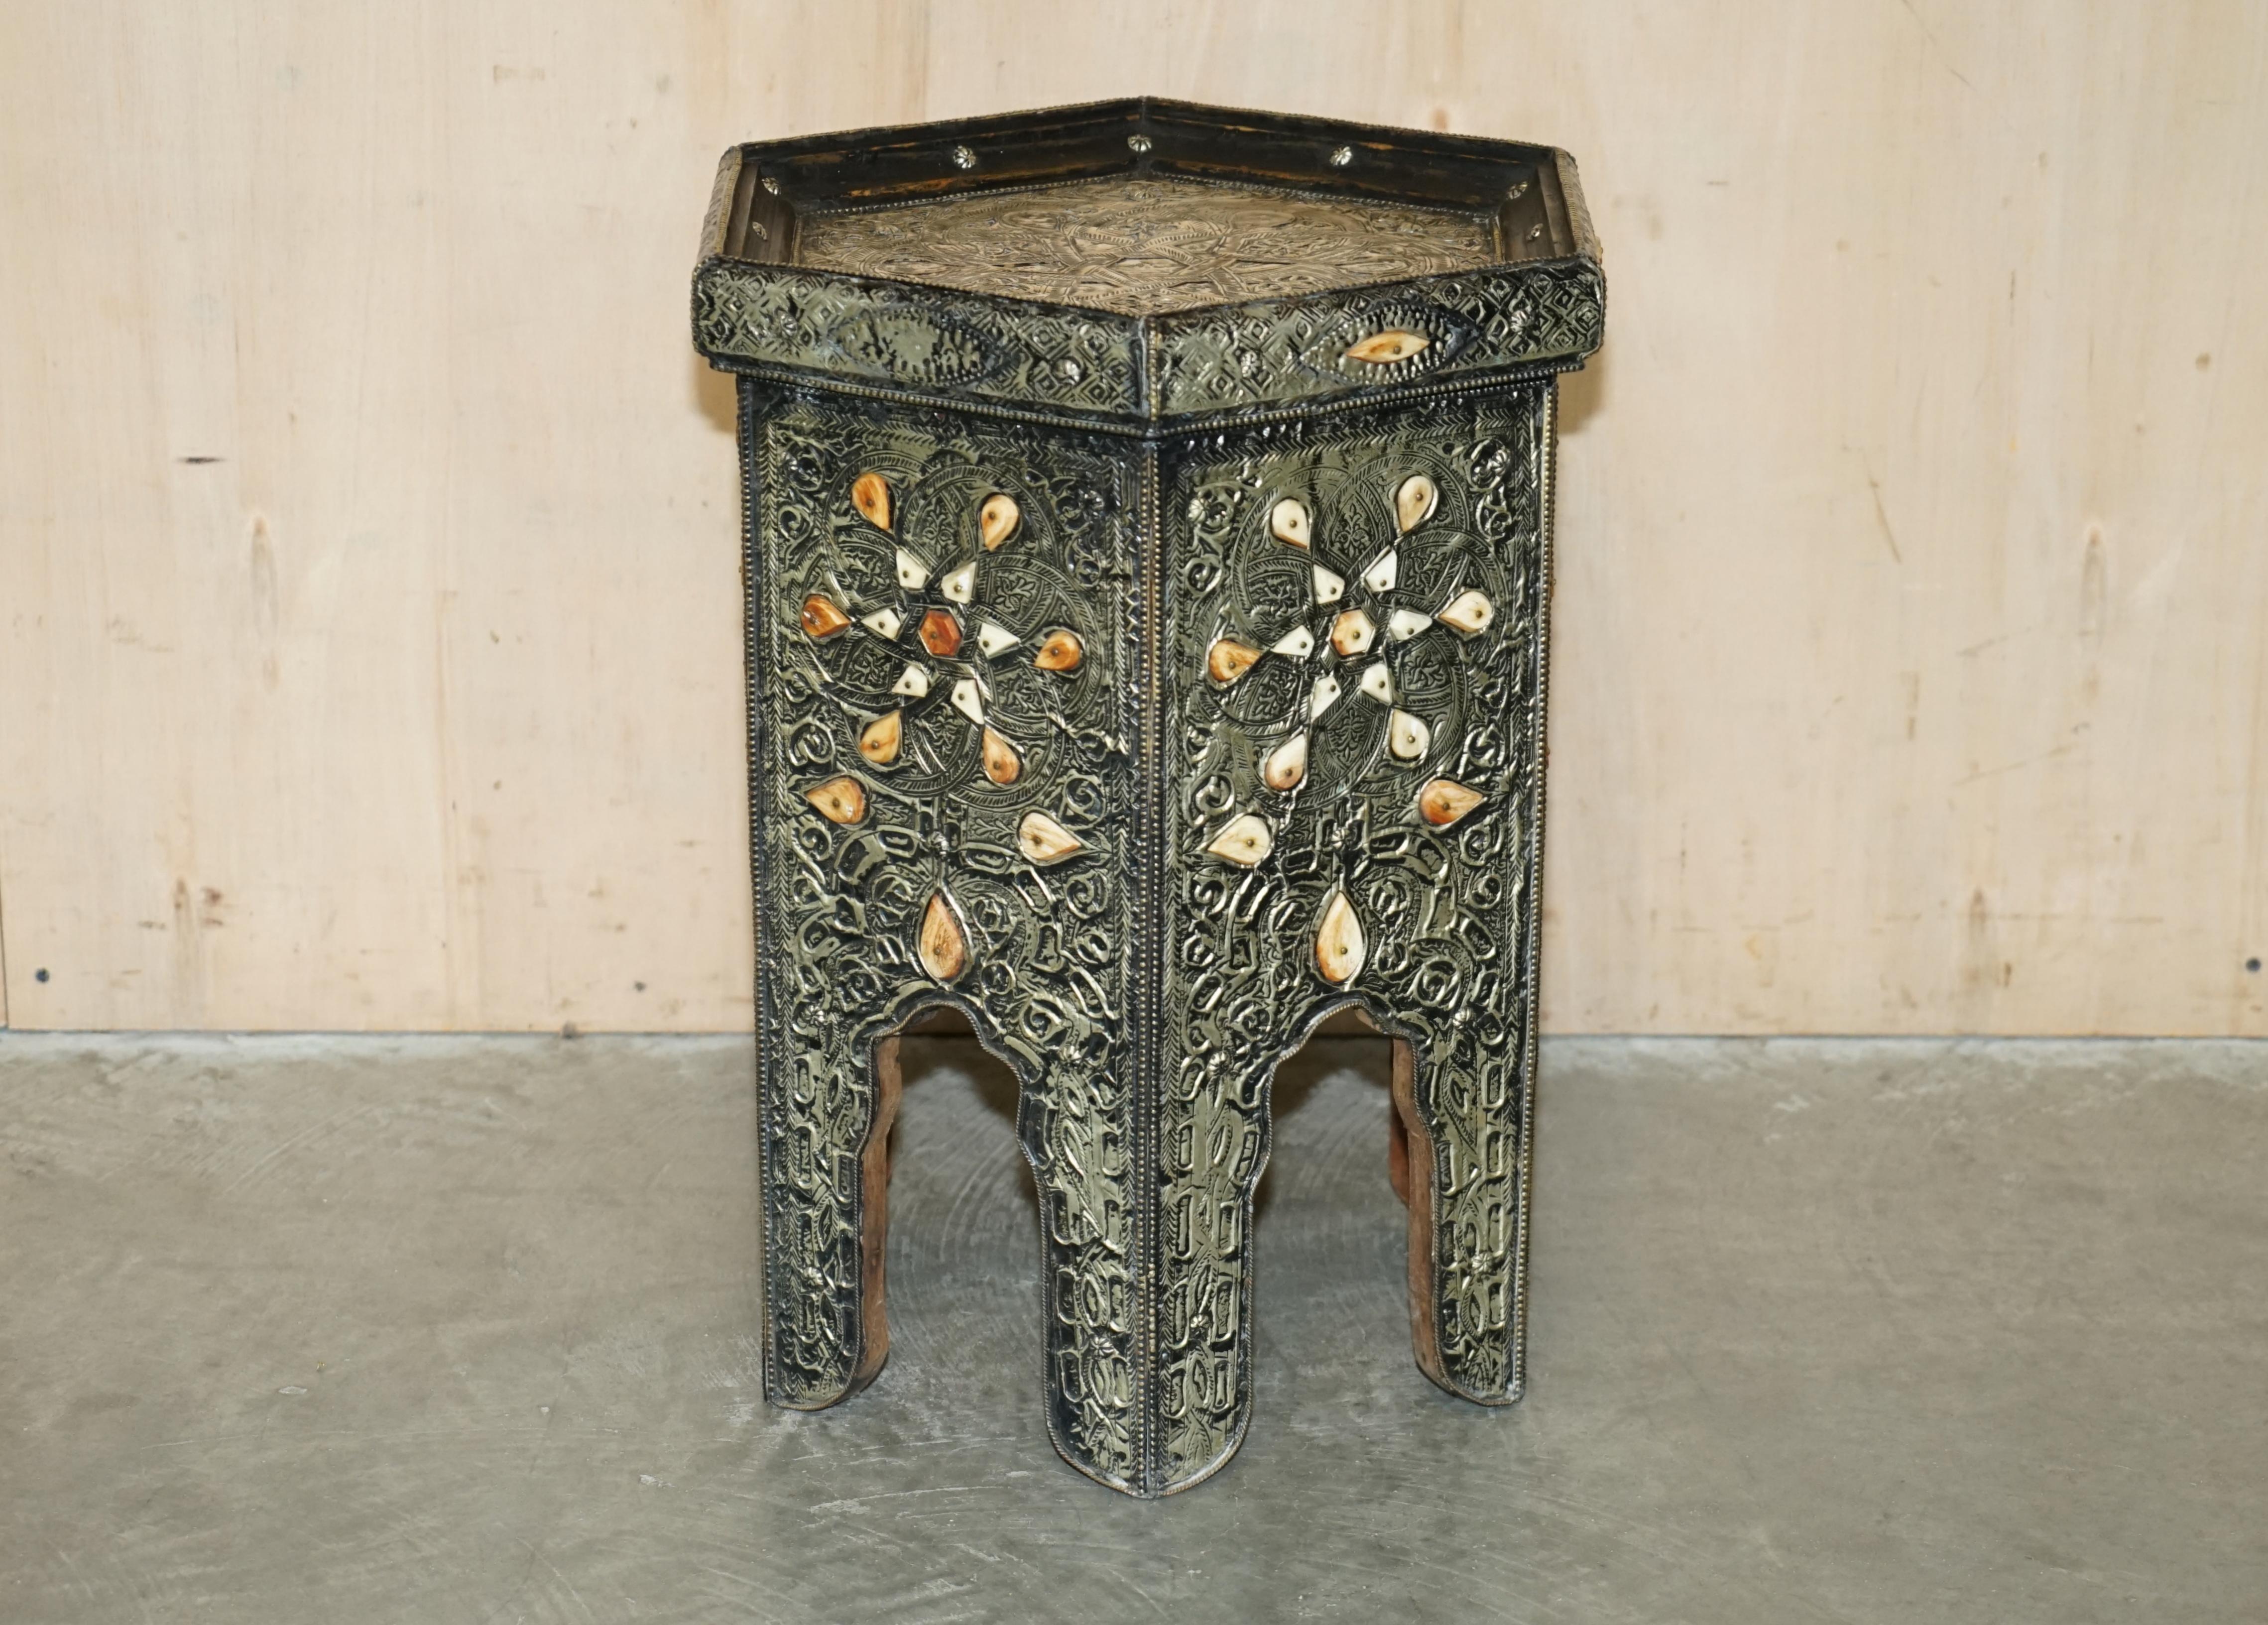 Royal House Antiques

Royal House Antiques is delighted to offer for sale this stunning Indian Repousse Pewter side table with inlaid stones 

Please note the delivery fee listed is just a guide, it covers within the M25 only for the UK and local